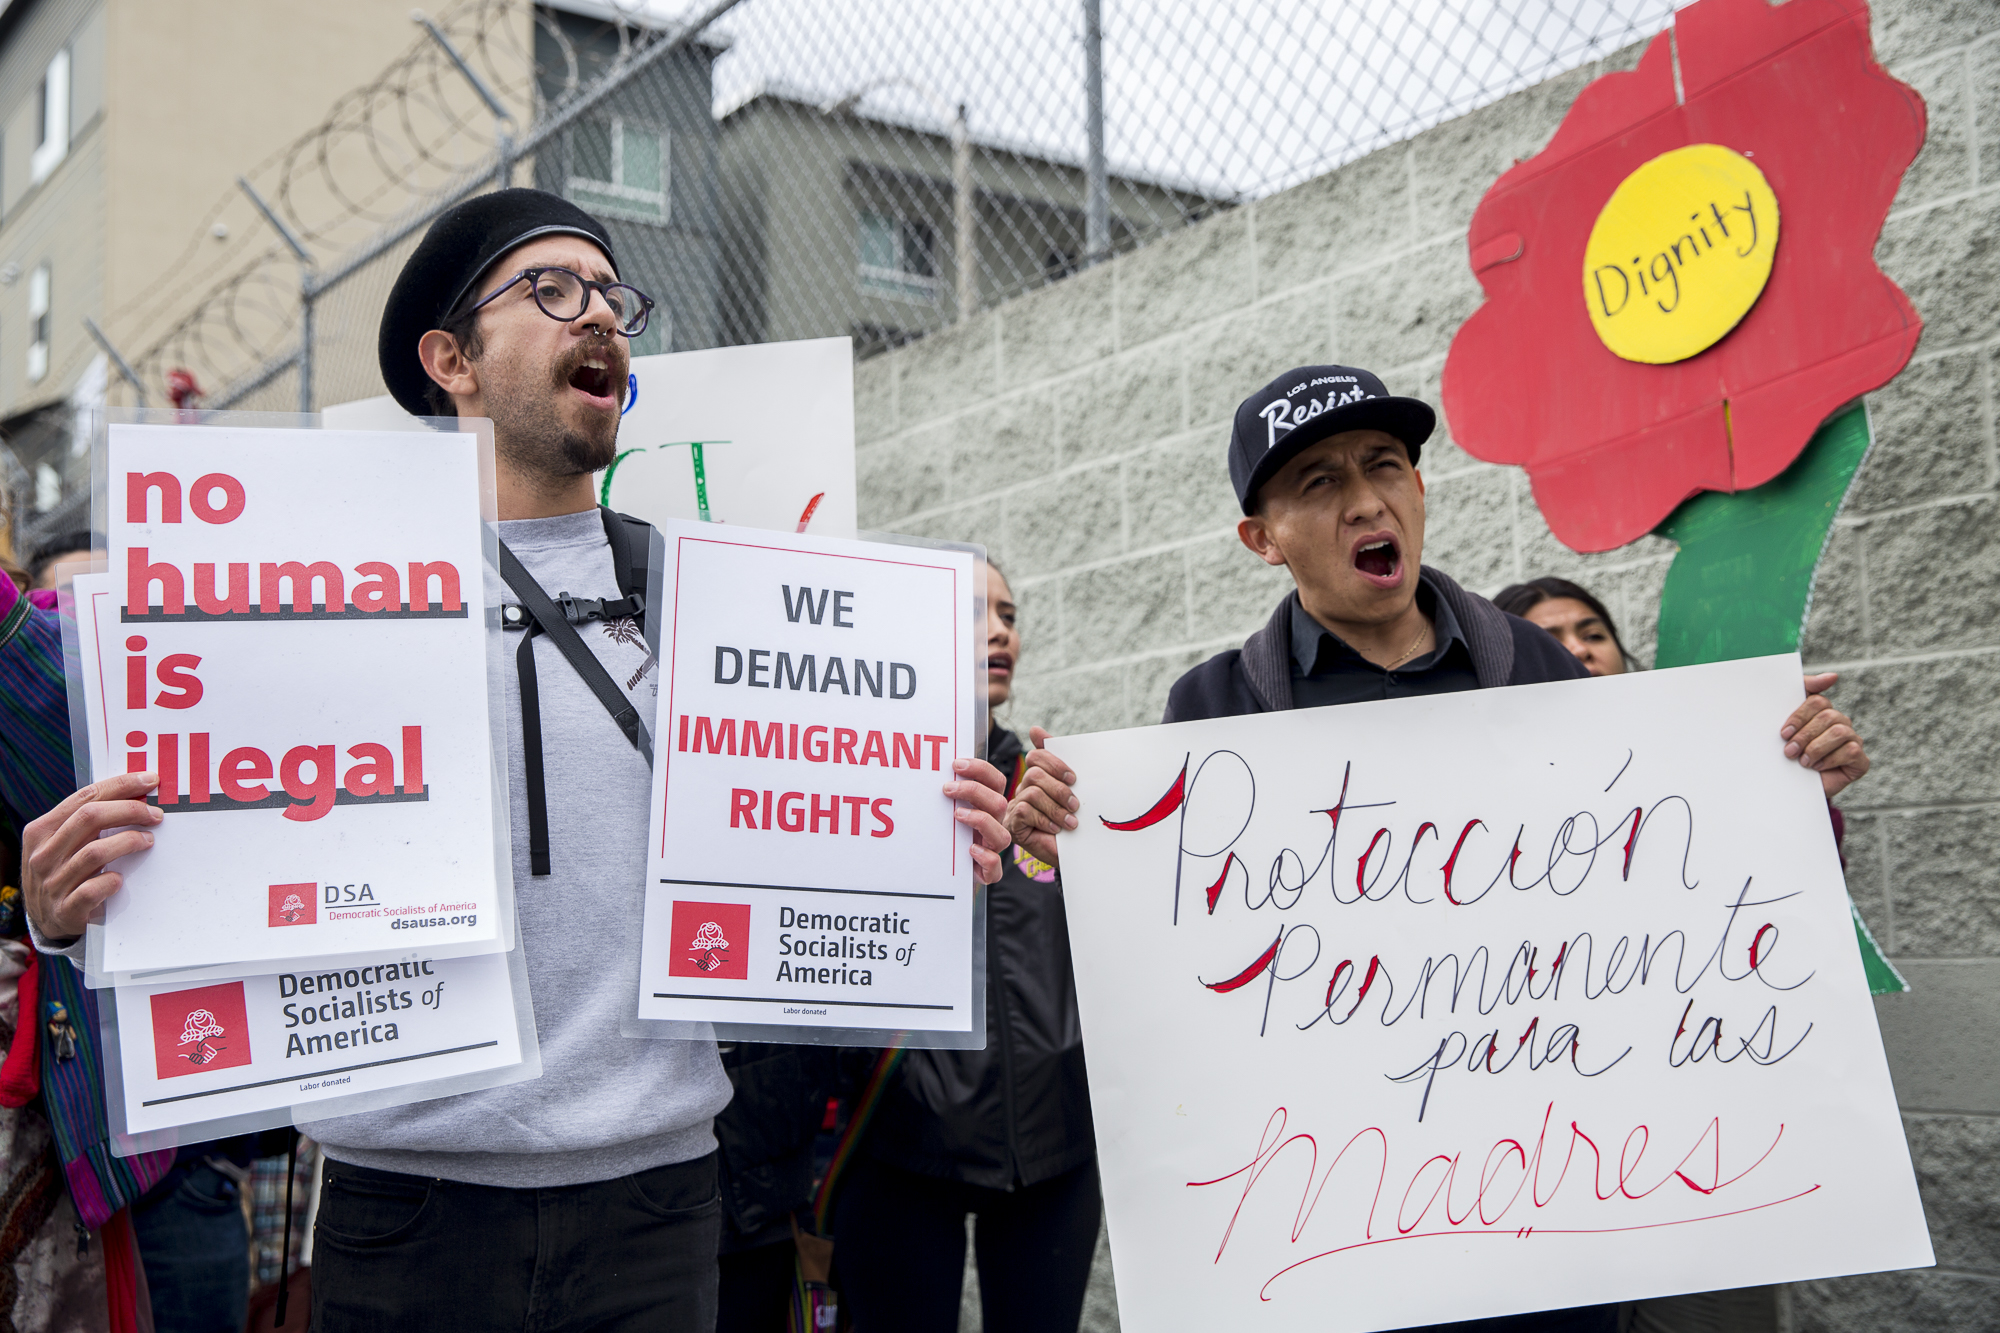  Movimiento Cosecha members Joseph Nicks (left) and Ricardo Rodriguez (right) march down 7th street from MacArther Park chanting and holding signs regarding the mistreatment of immigrants in the United States during the undocumented immigrant mother’